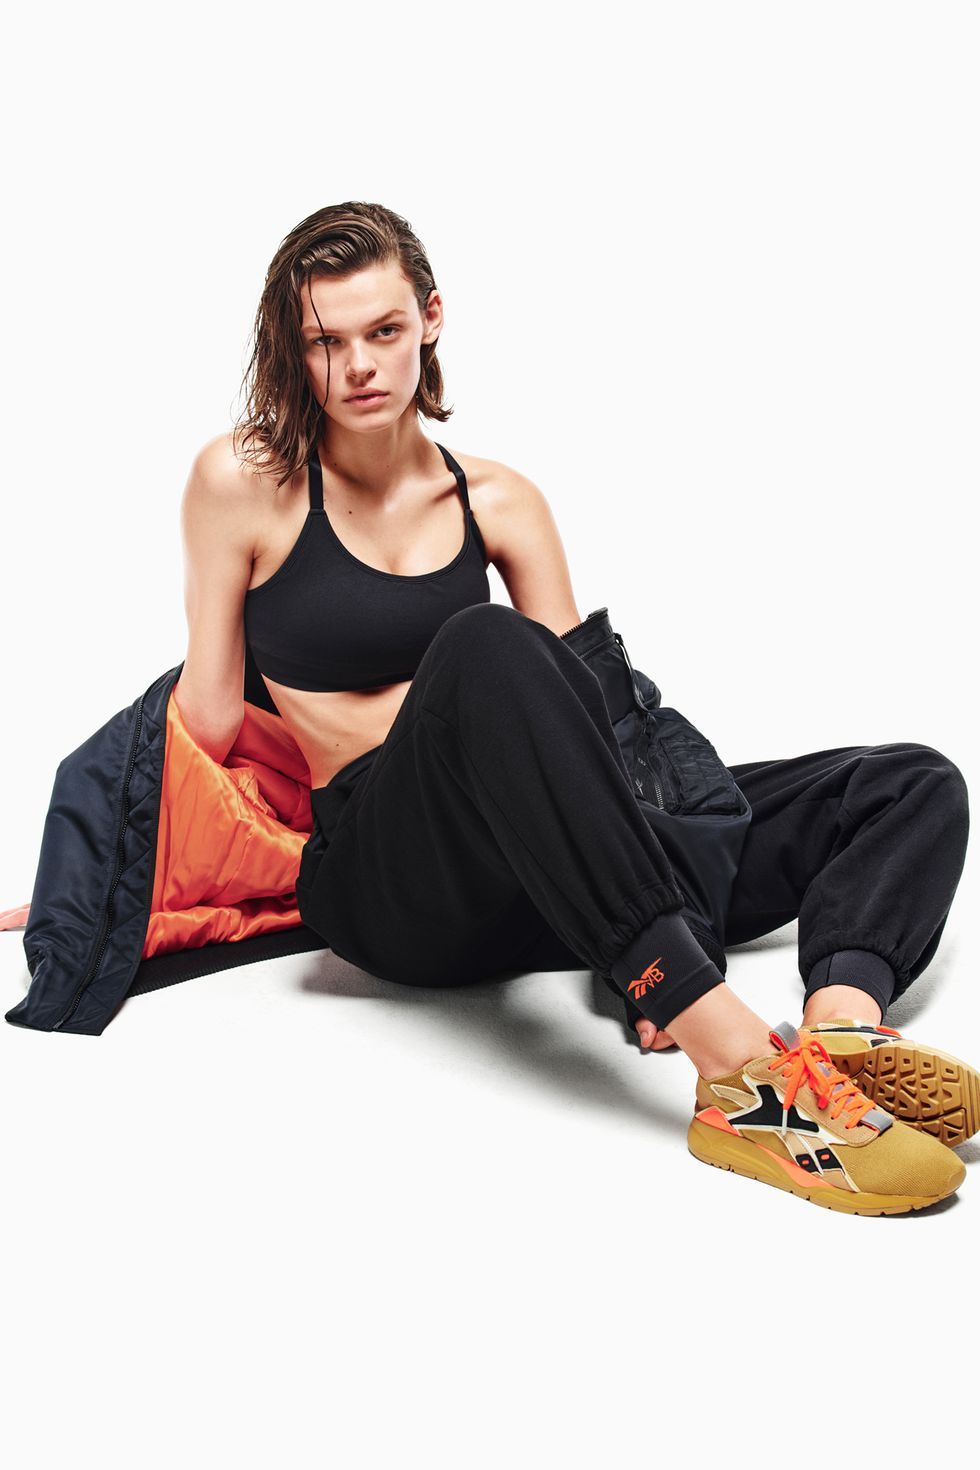 Victoria Beckham for Reebok: See the full collection